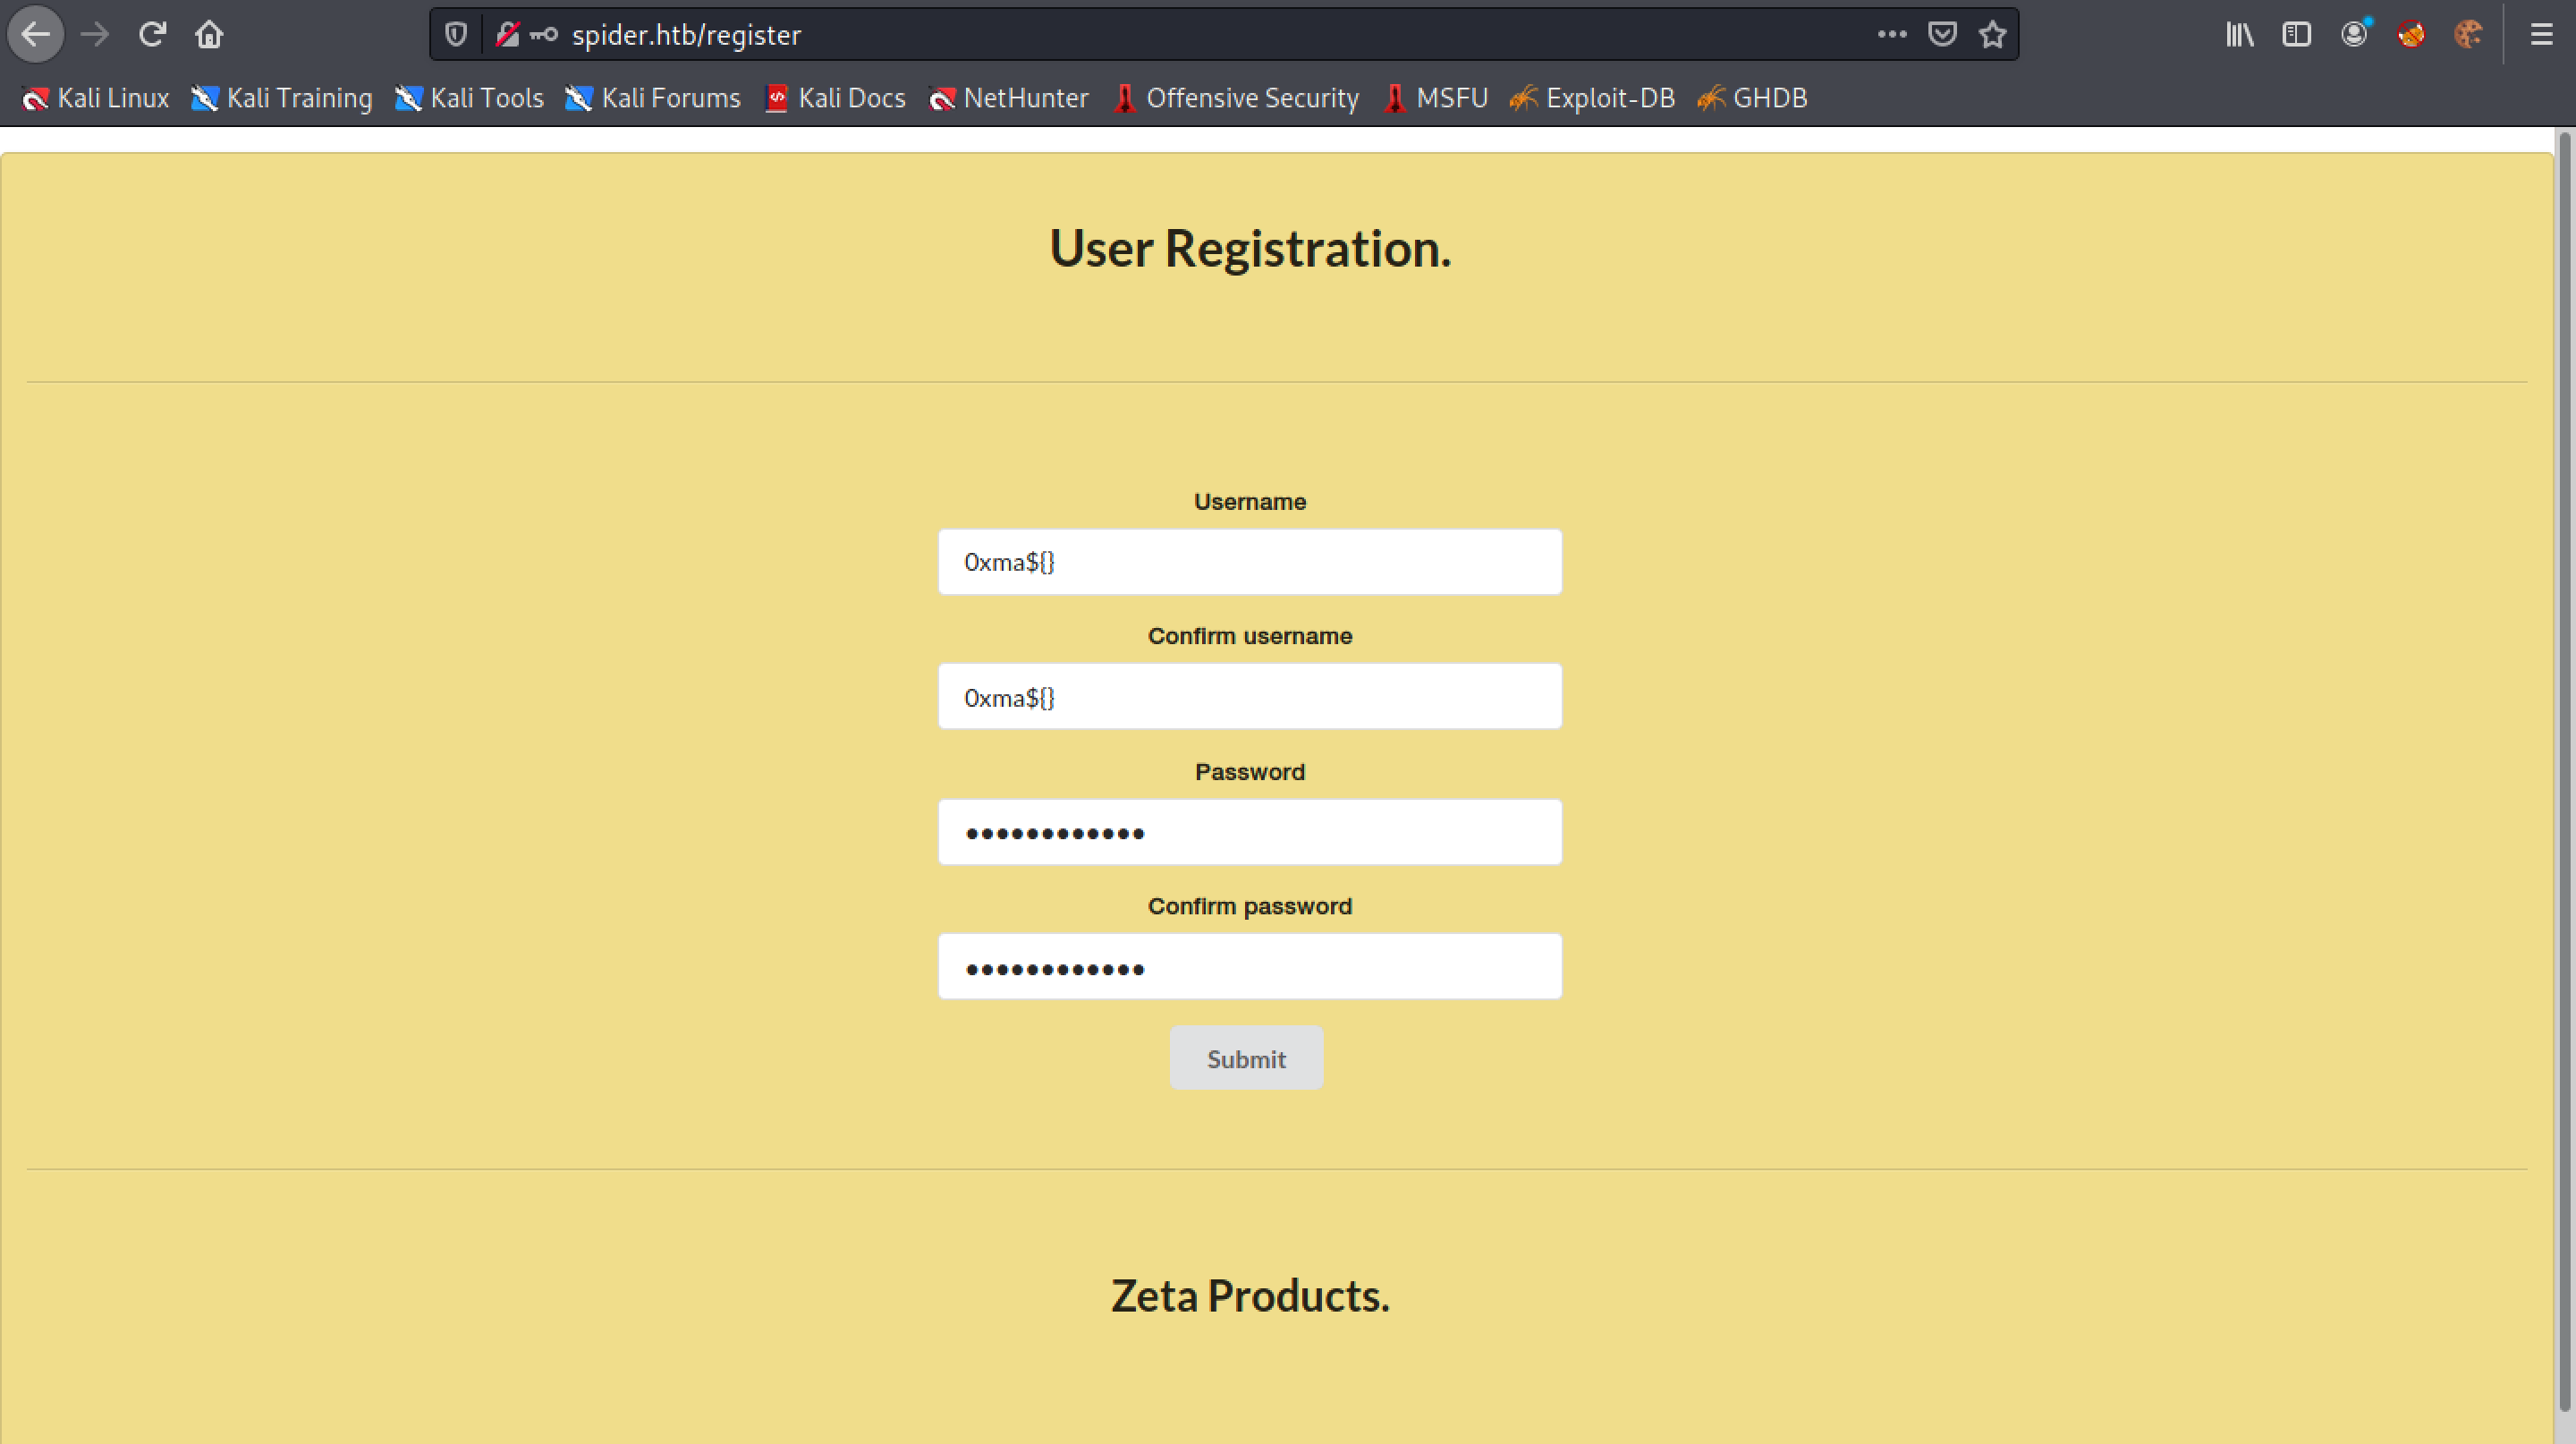 Register user with SSTI payload.